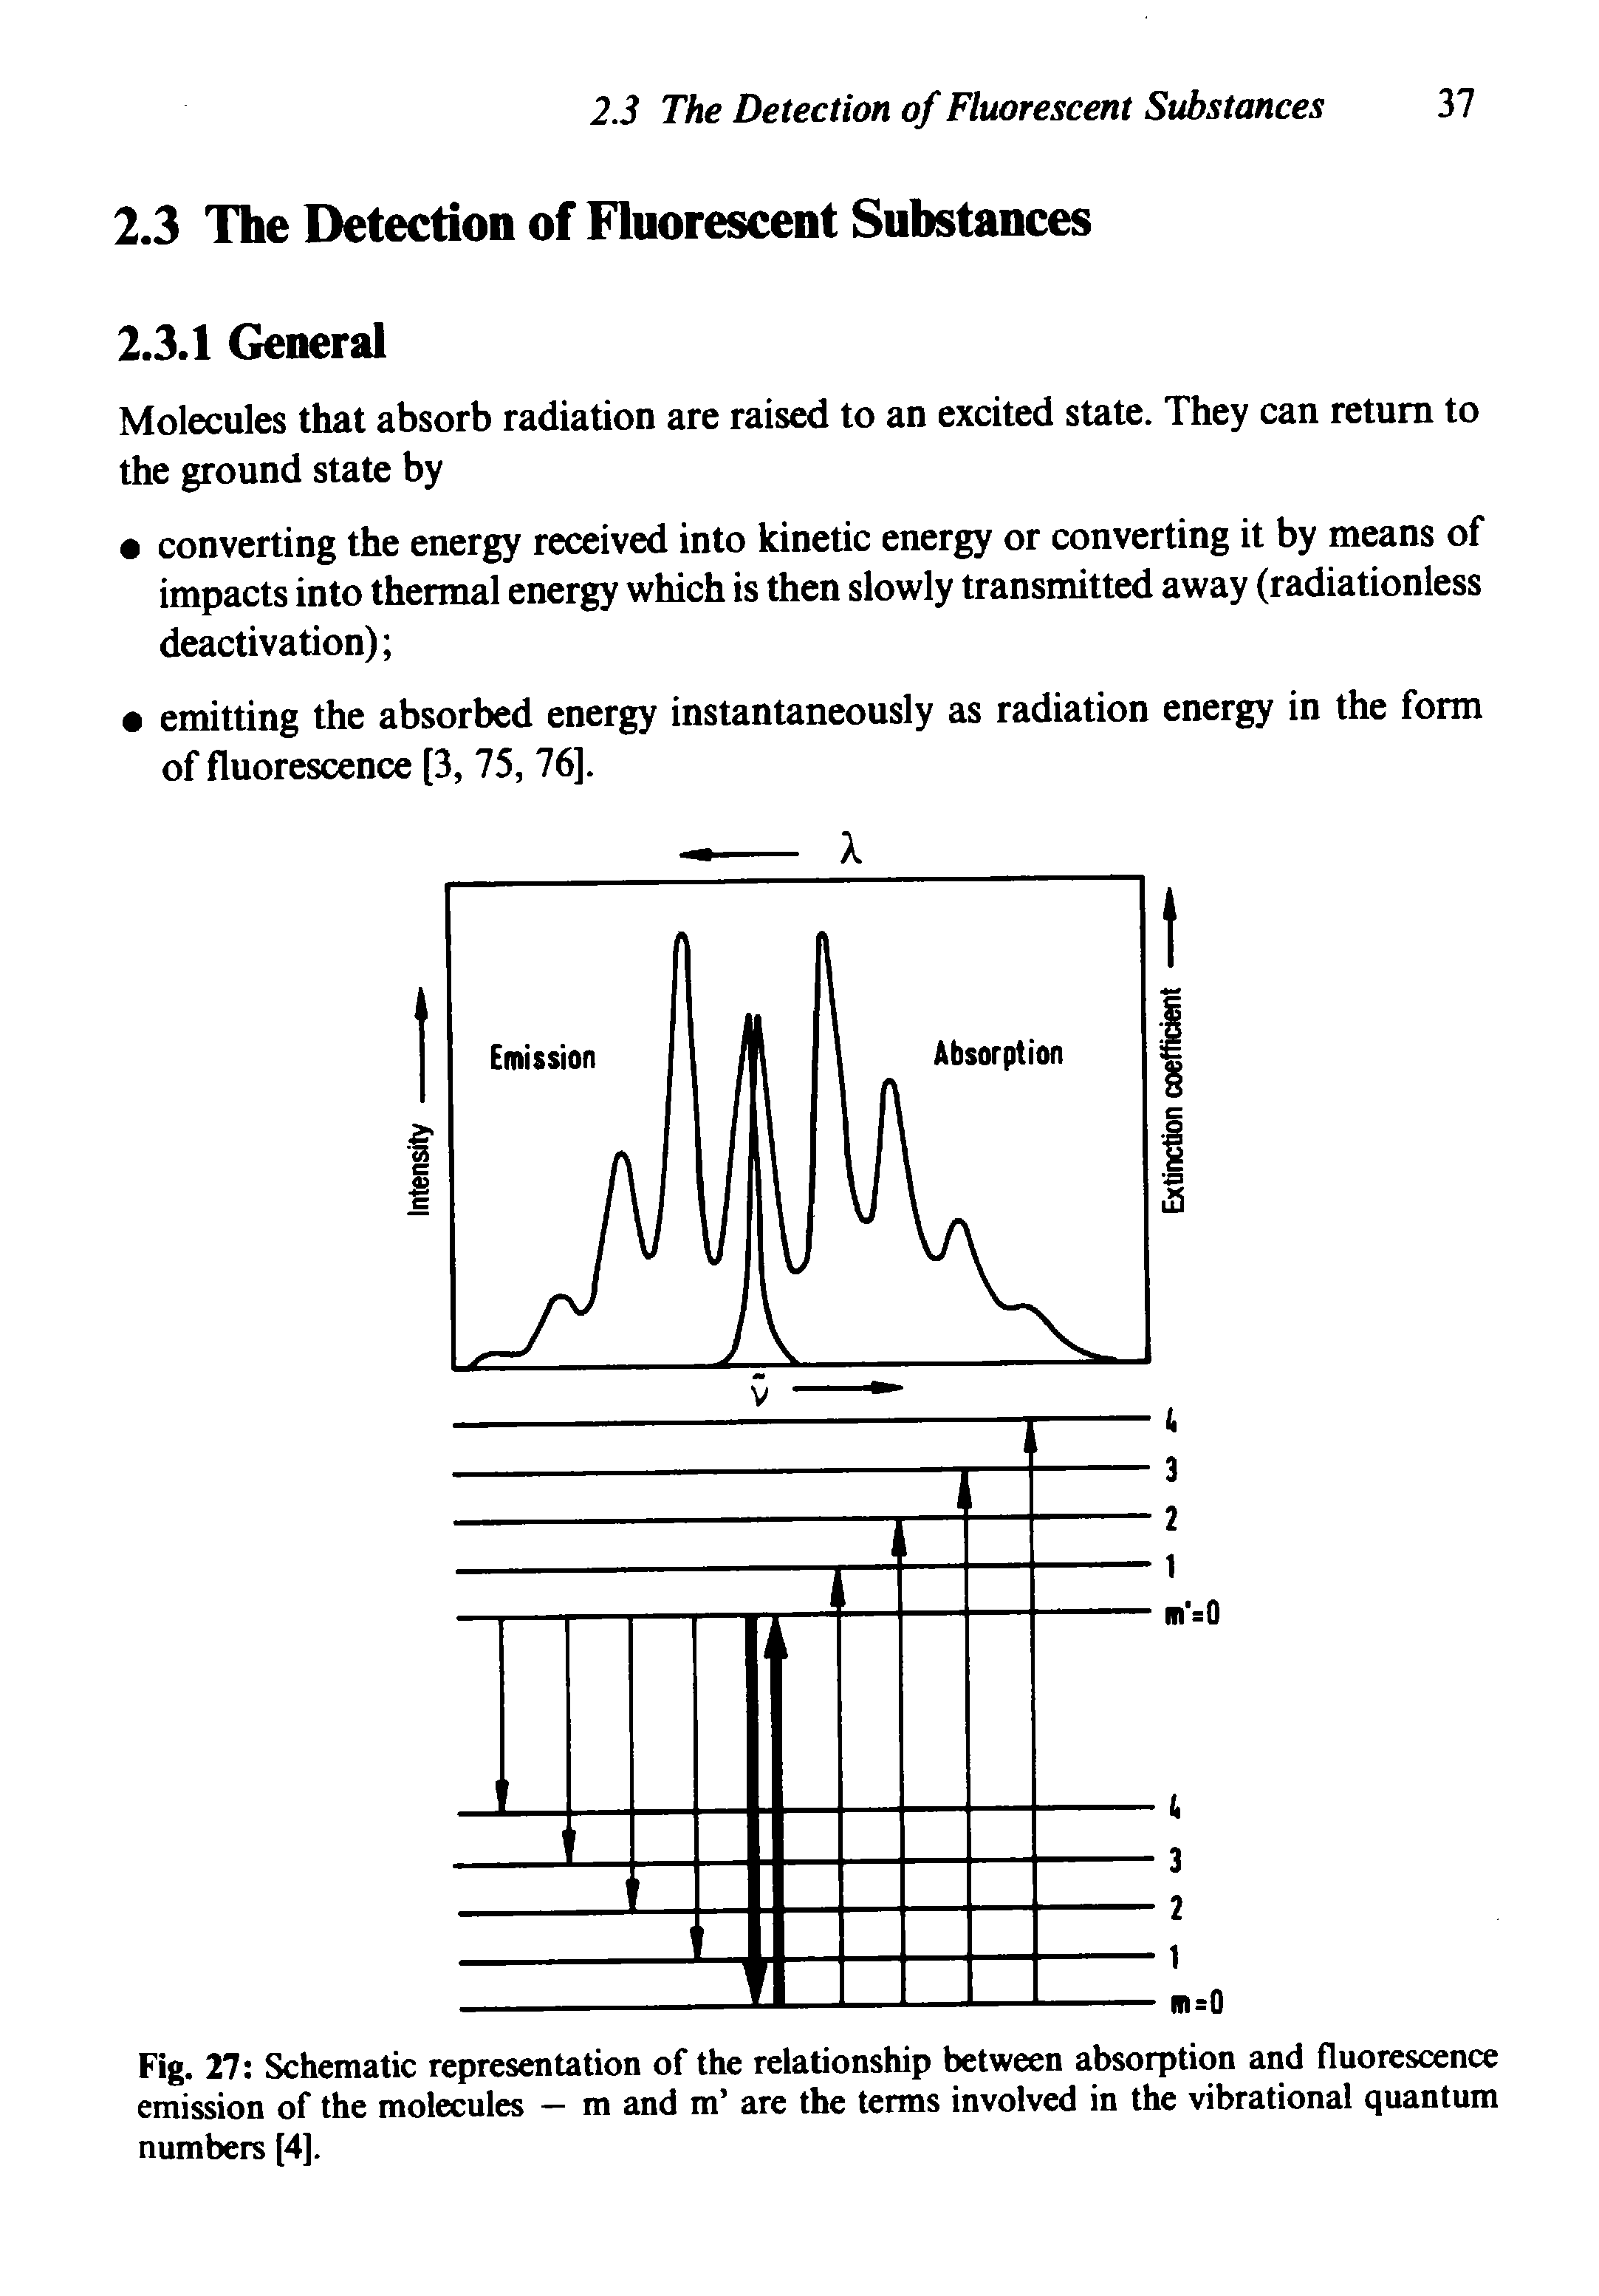 Fig. 27 Schematic representation of the relationship between absorption and fluorescence emission of the molecules — m and m are the terms involved in the vibrational quantum numbers [4],...